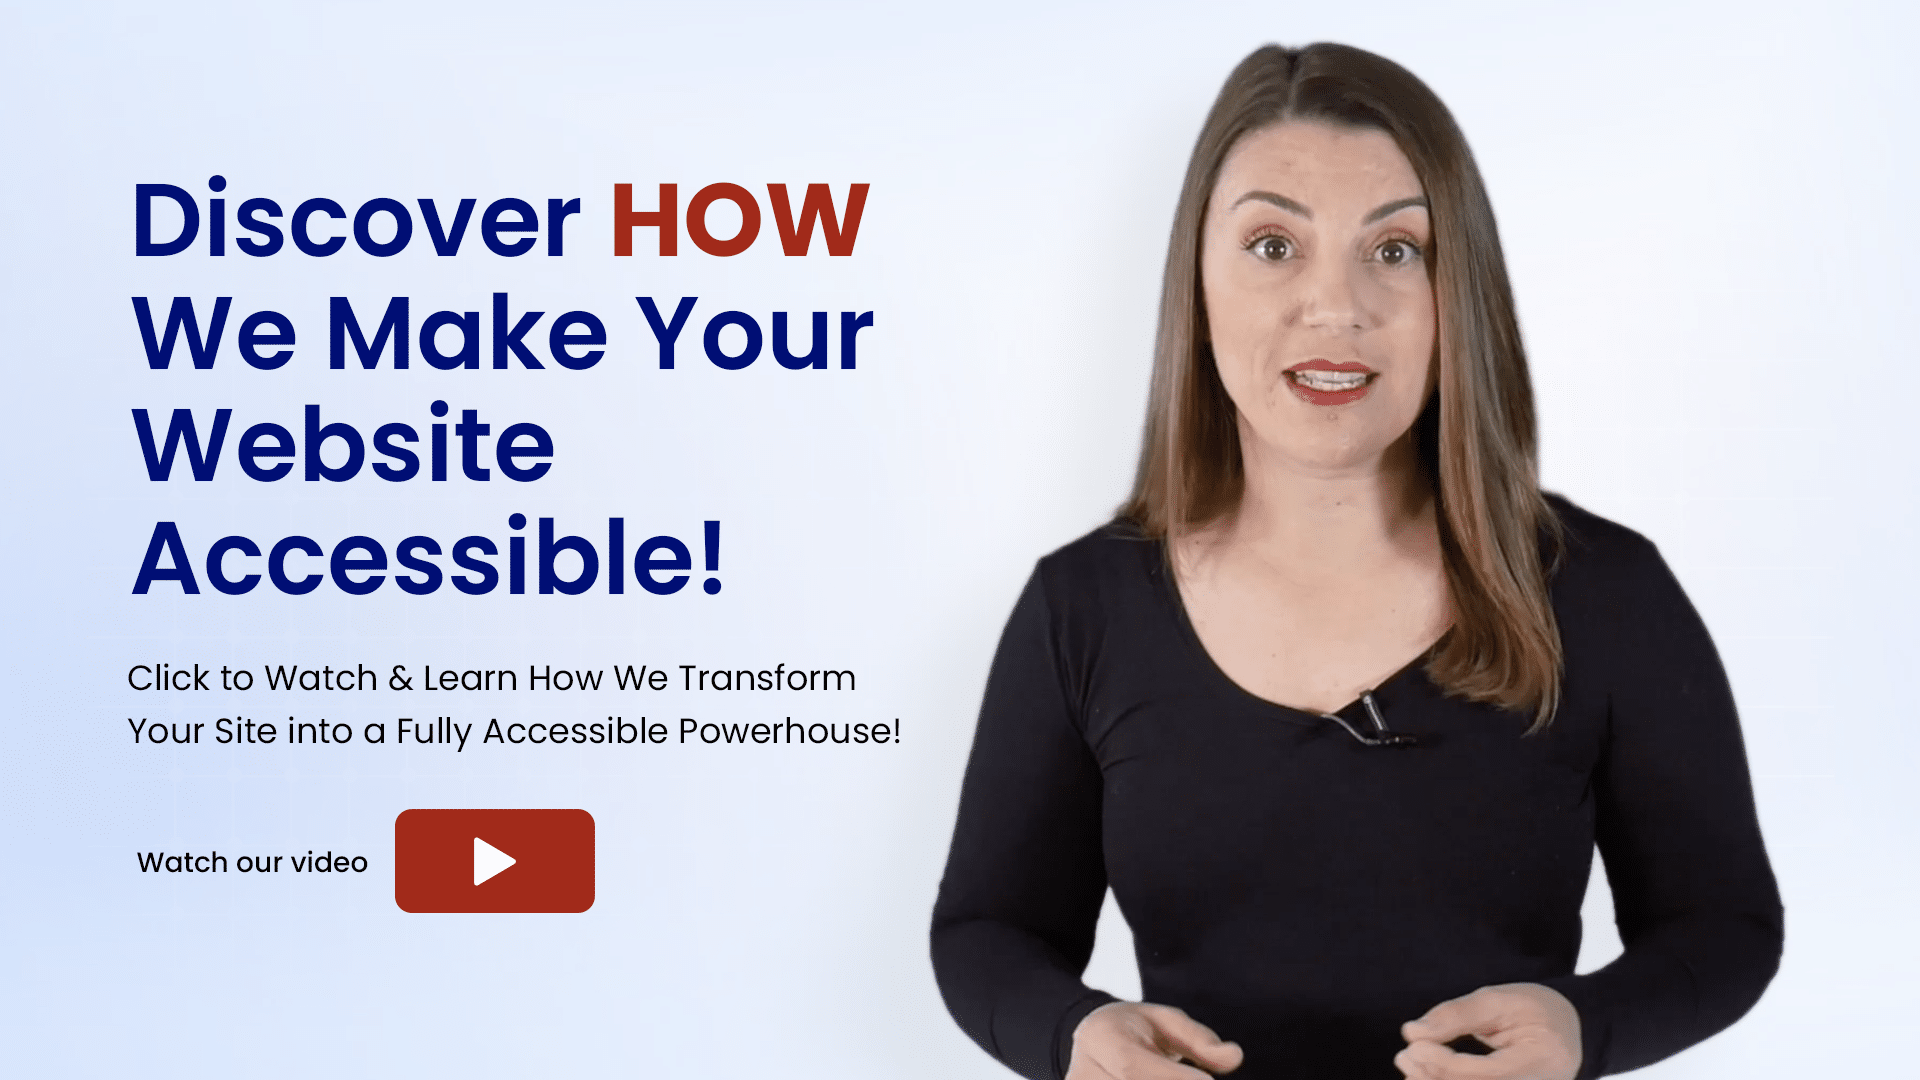 Discover how we make your website accessible, click to watch and learn how we transfer your site into fully accessible powerhouse. watch our video